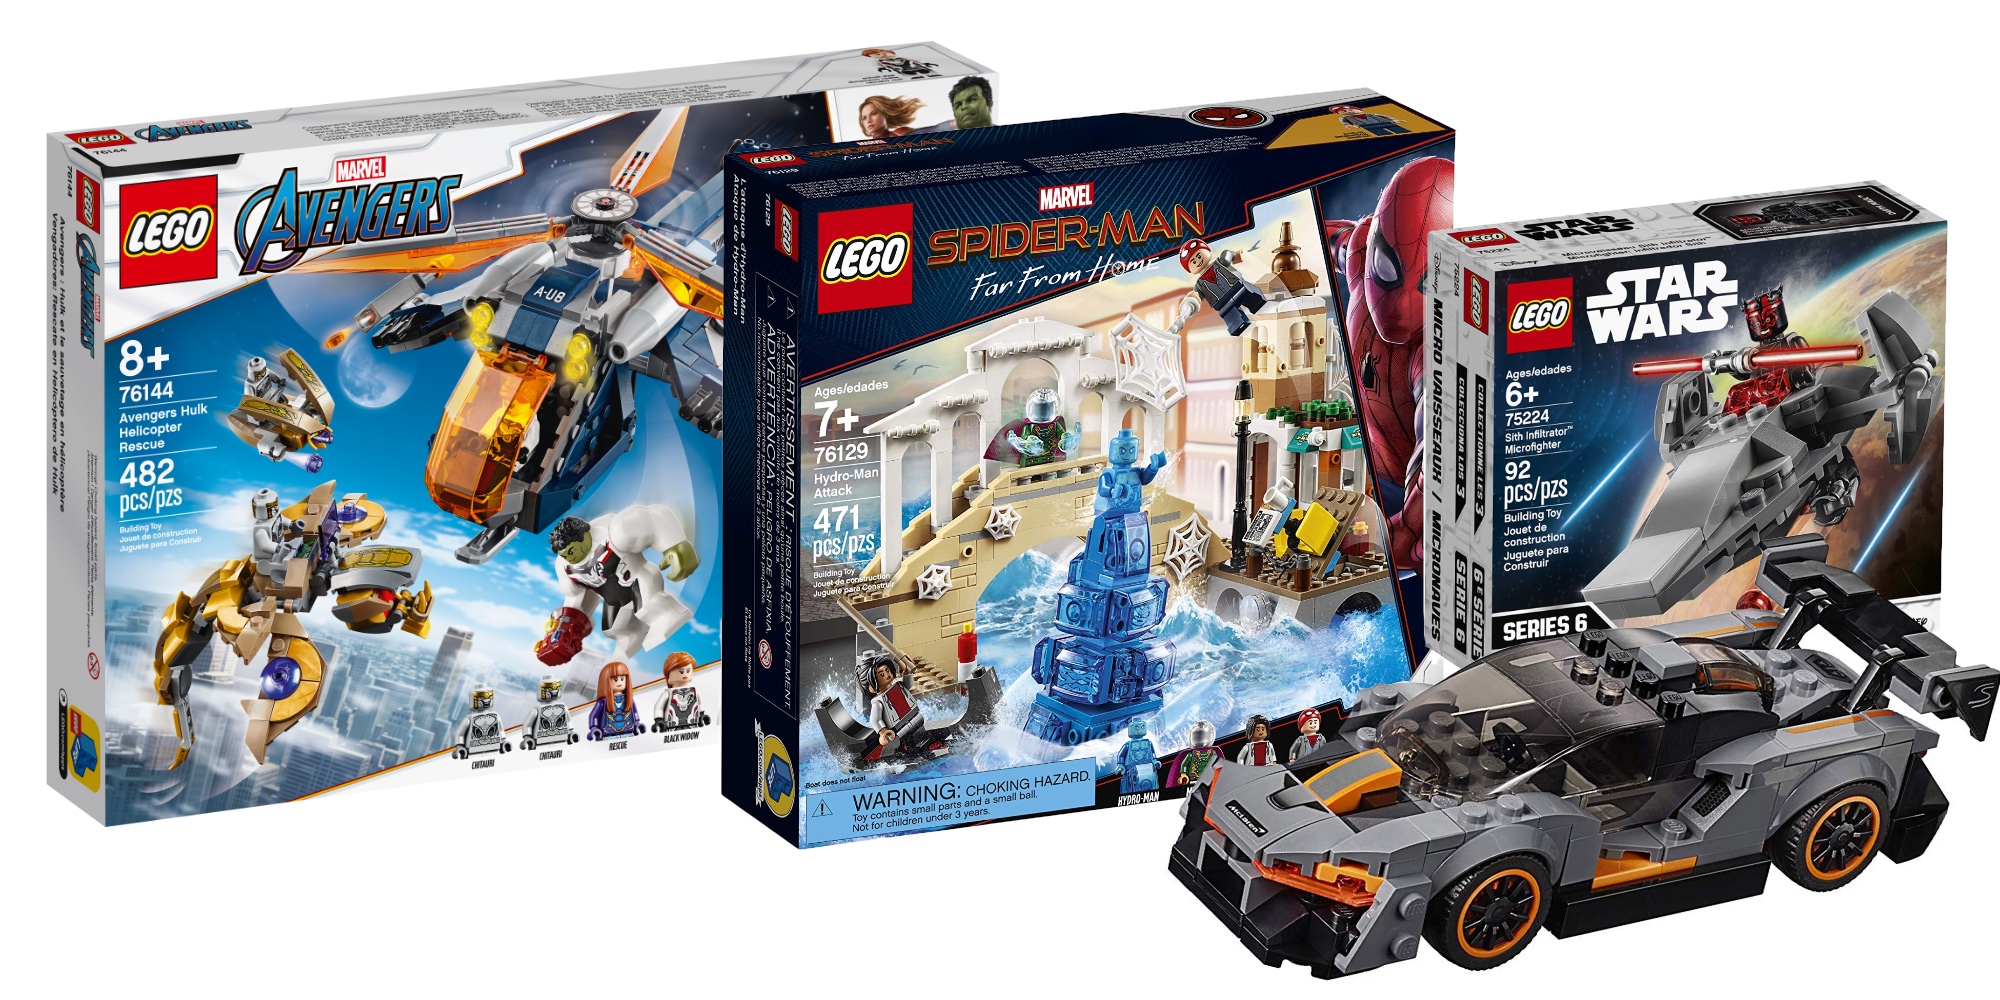 Spider Man Far From Home Lego Sets